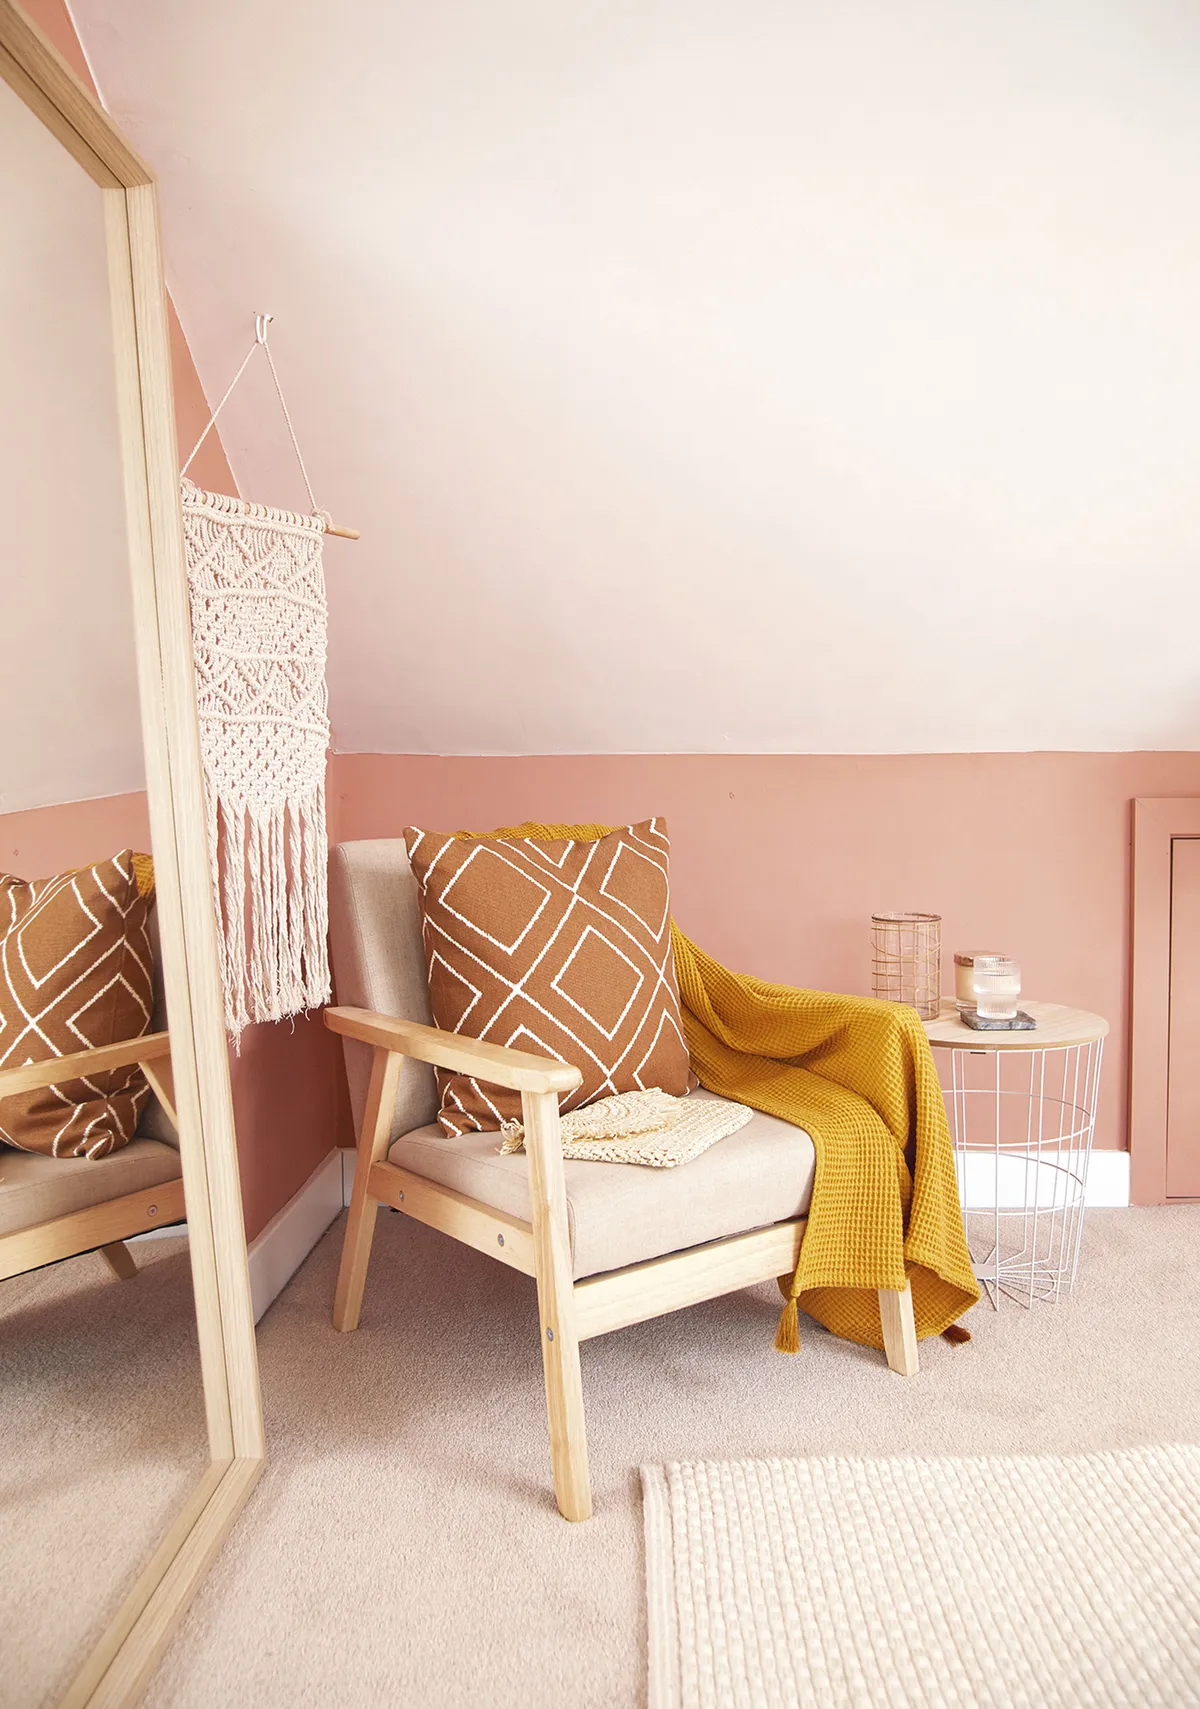 ‘We knew we wanted this room to be bright but also cosy, so we chose a paint colour that was a warm take on a newly plastered wall effect. The chair is from eBay and helps create a relaxing corner’